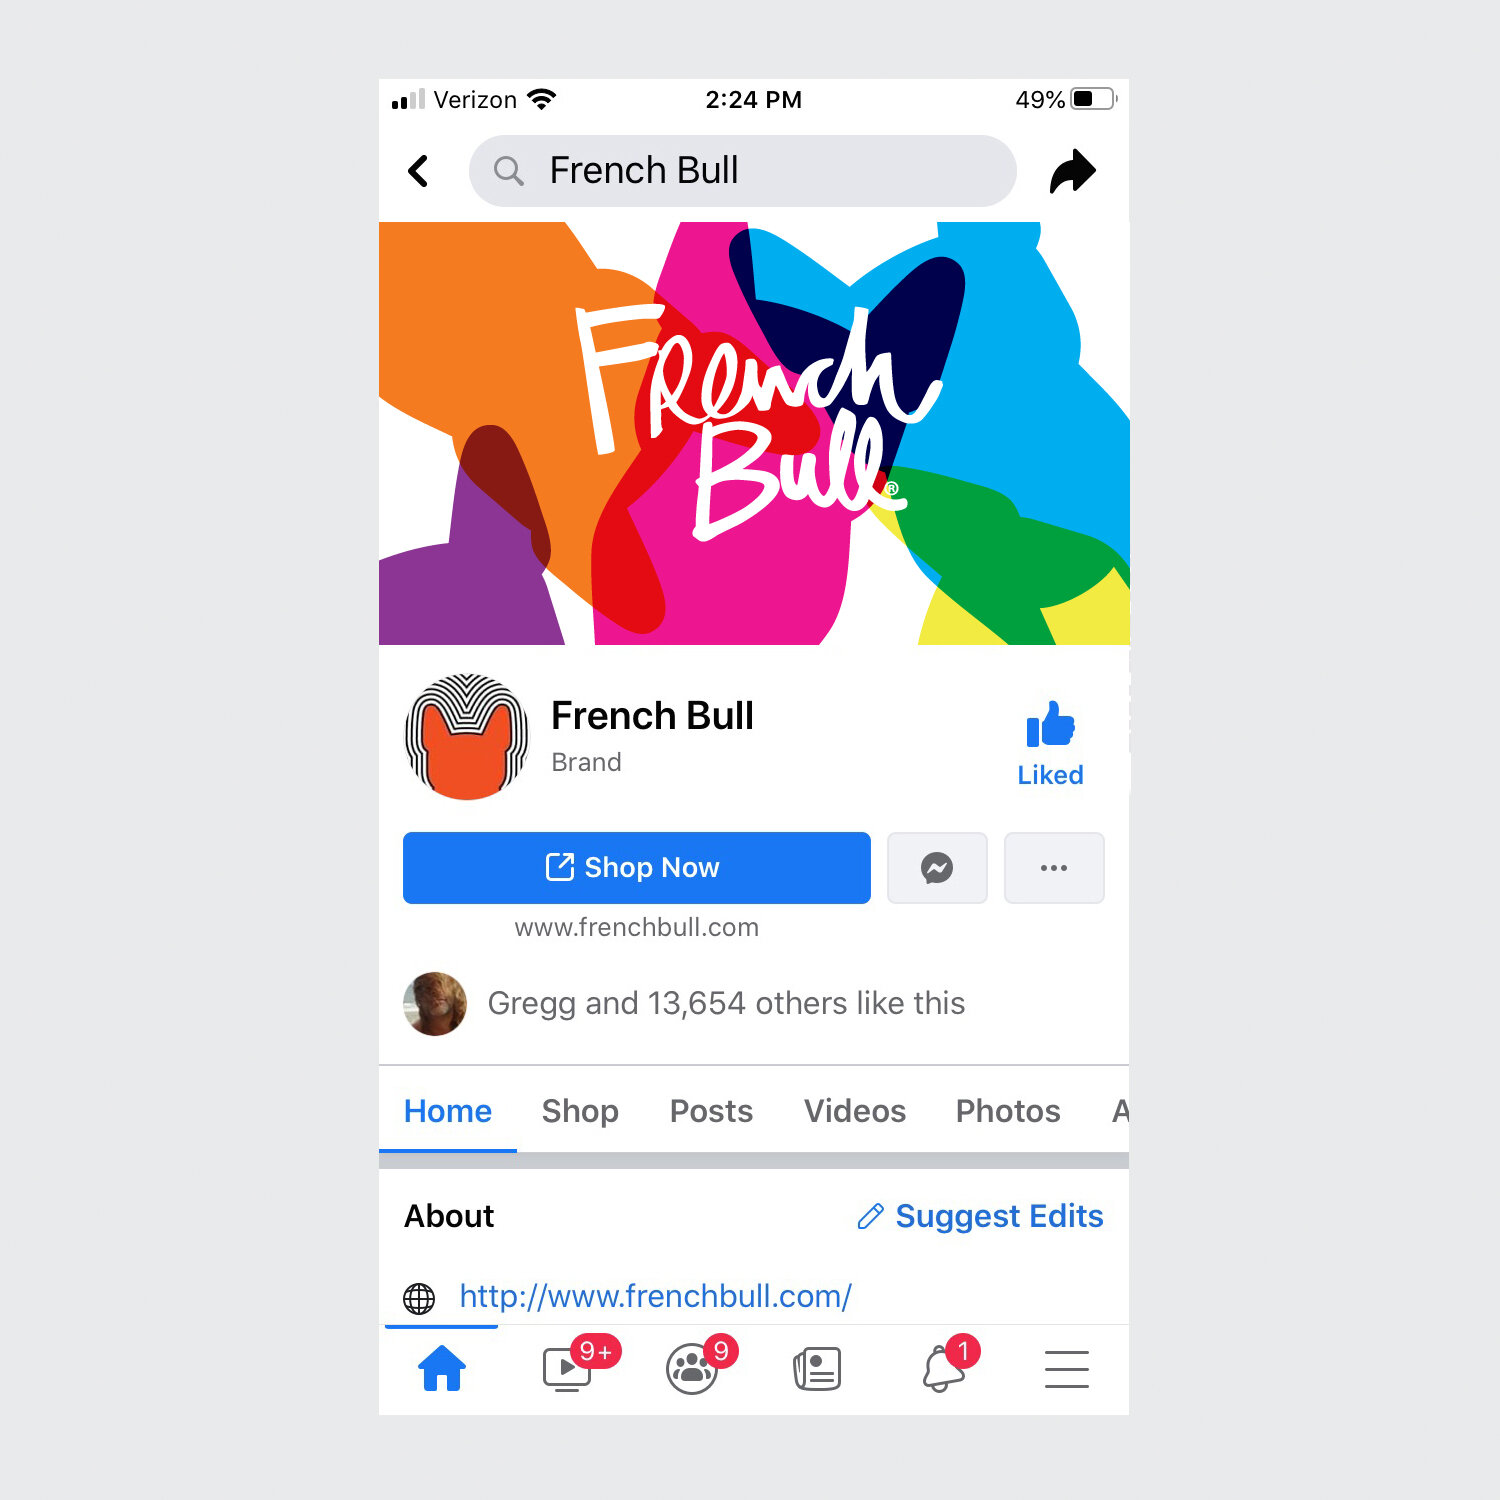  FRENCH BULL FaceBook Brand Profile 